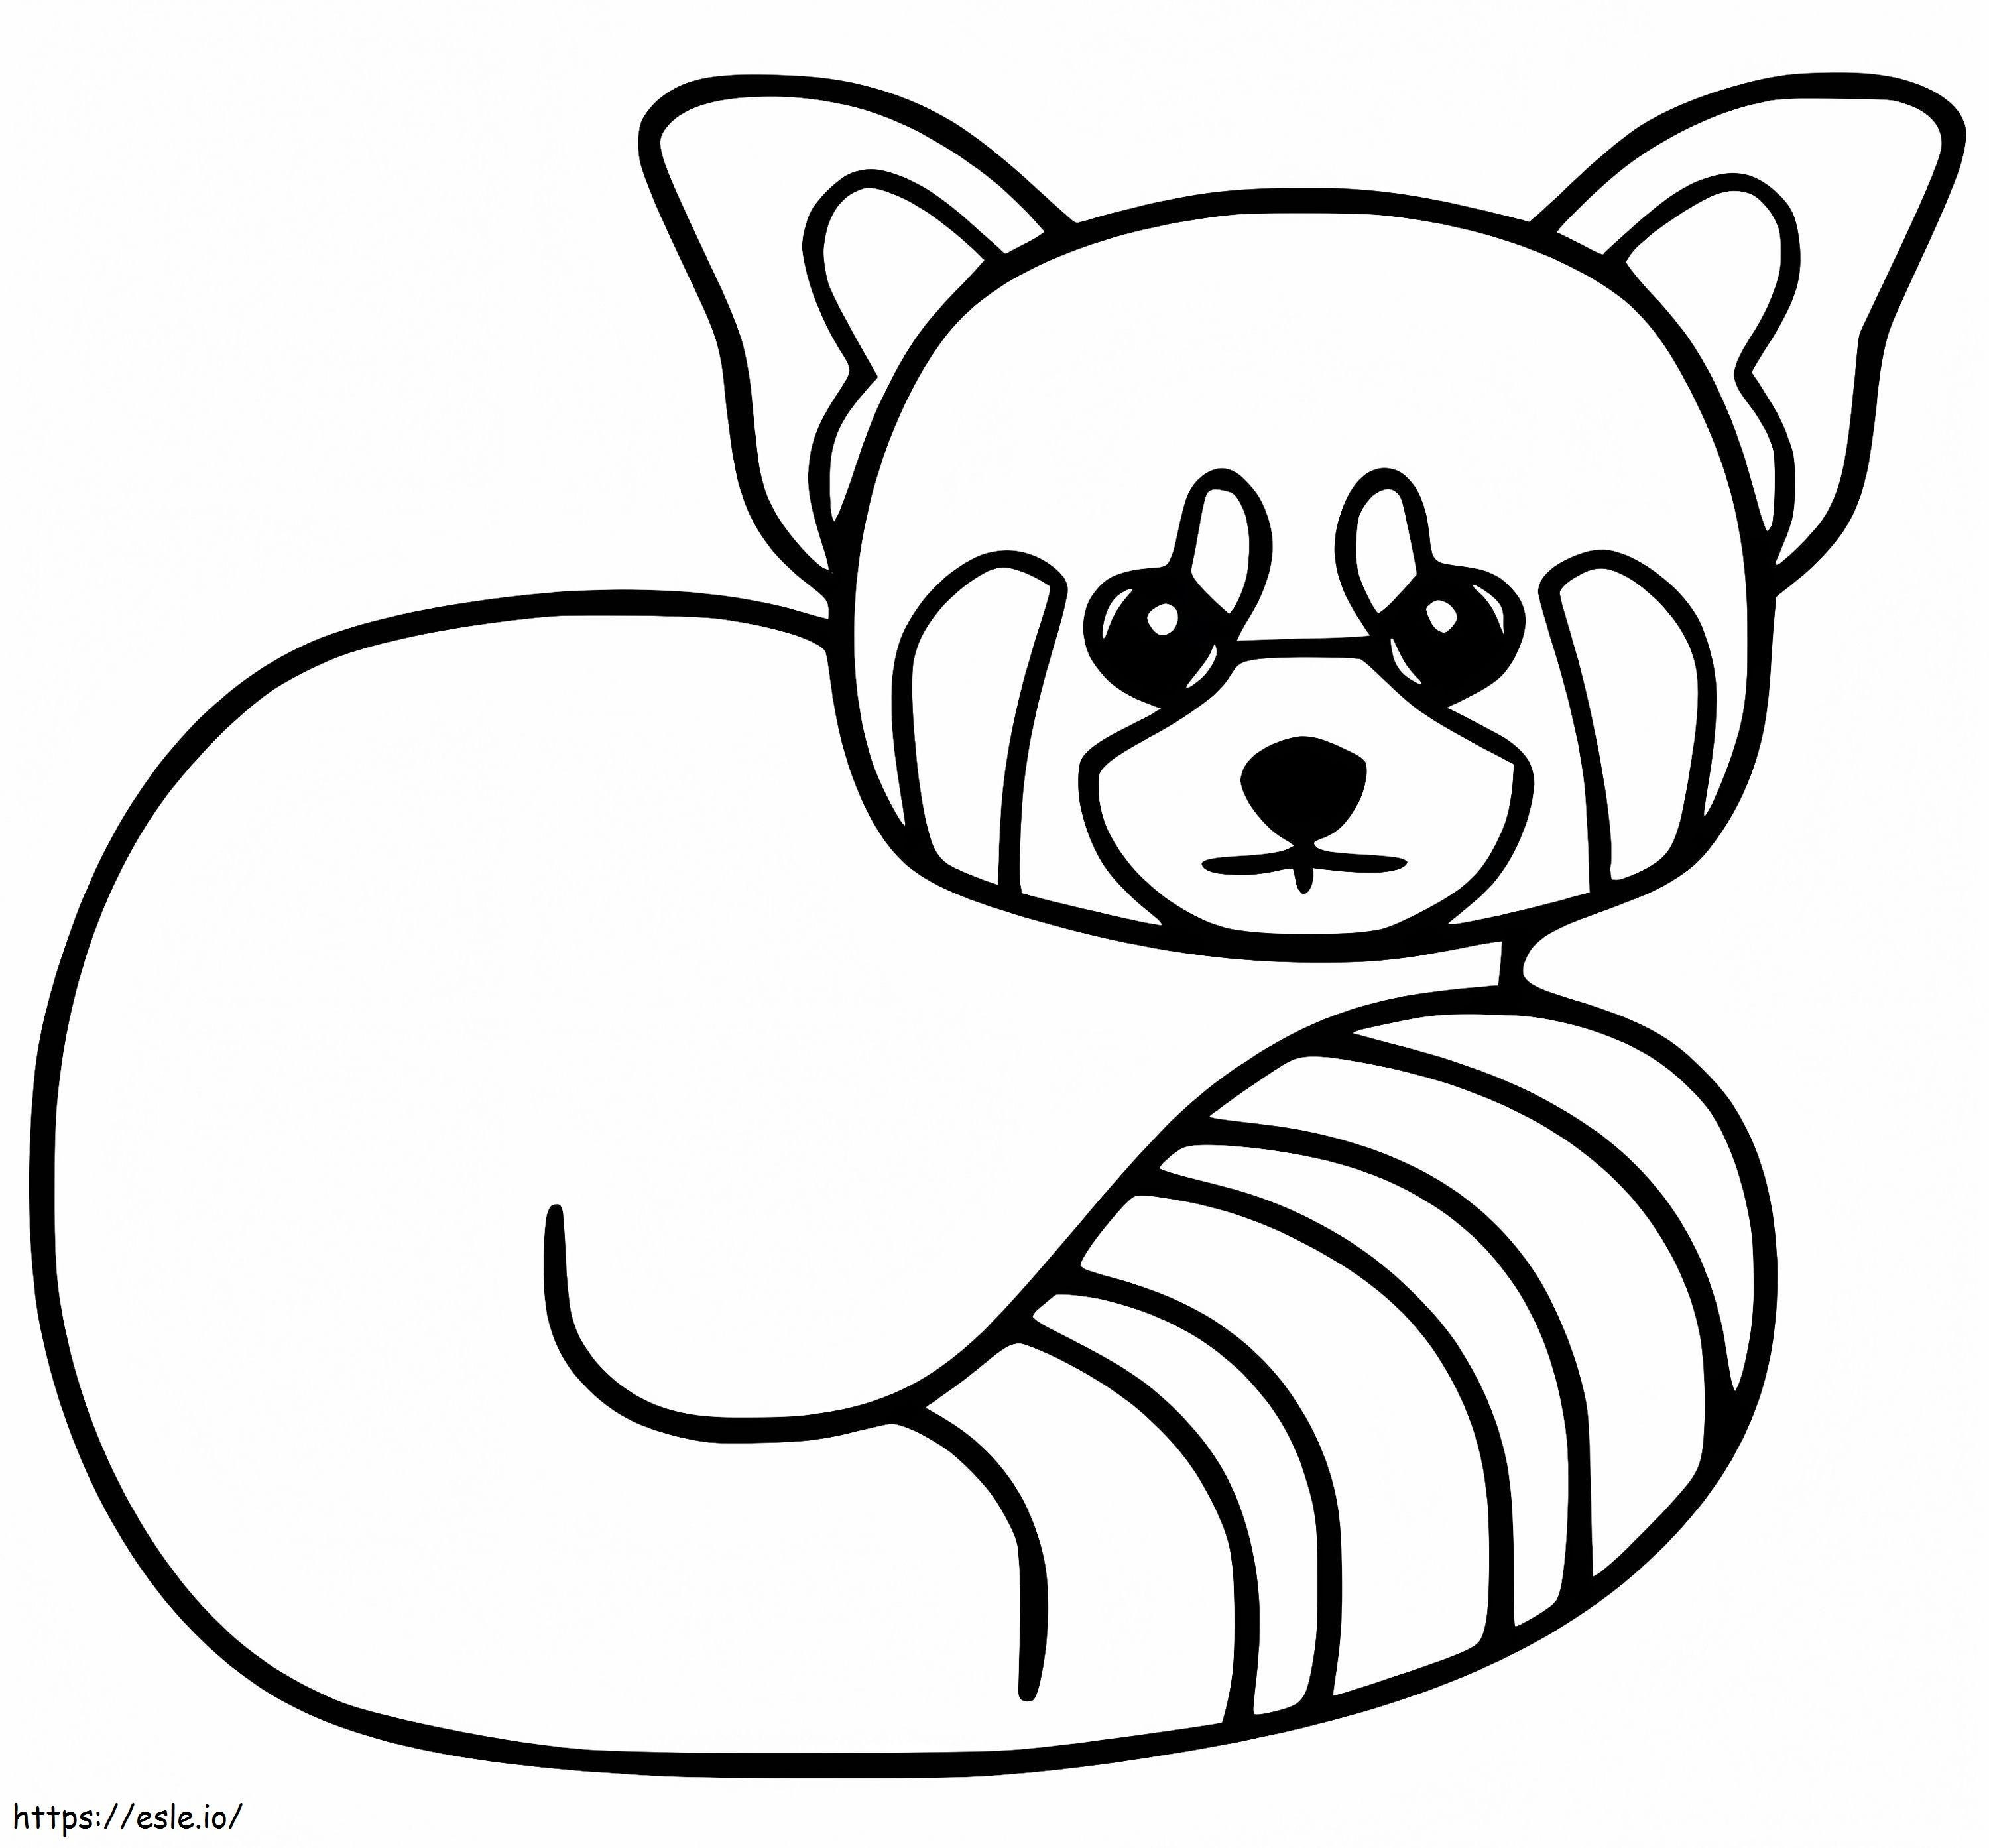 Adorable Red Panda coloring page